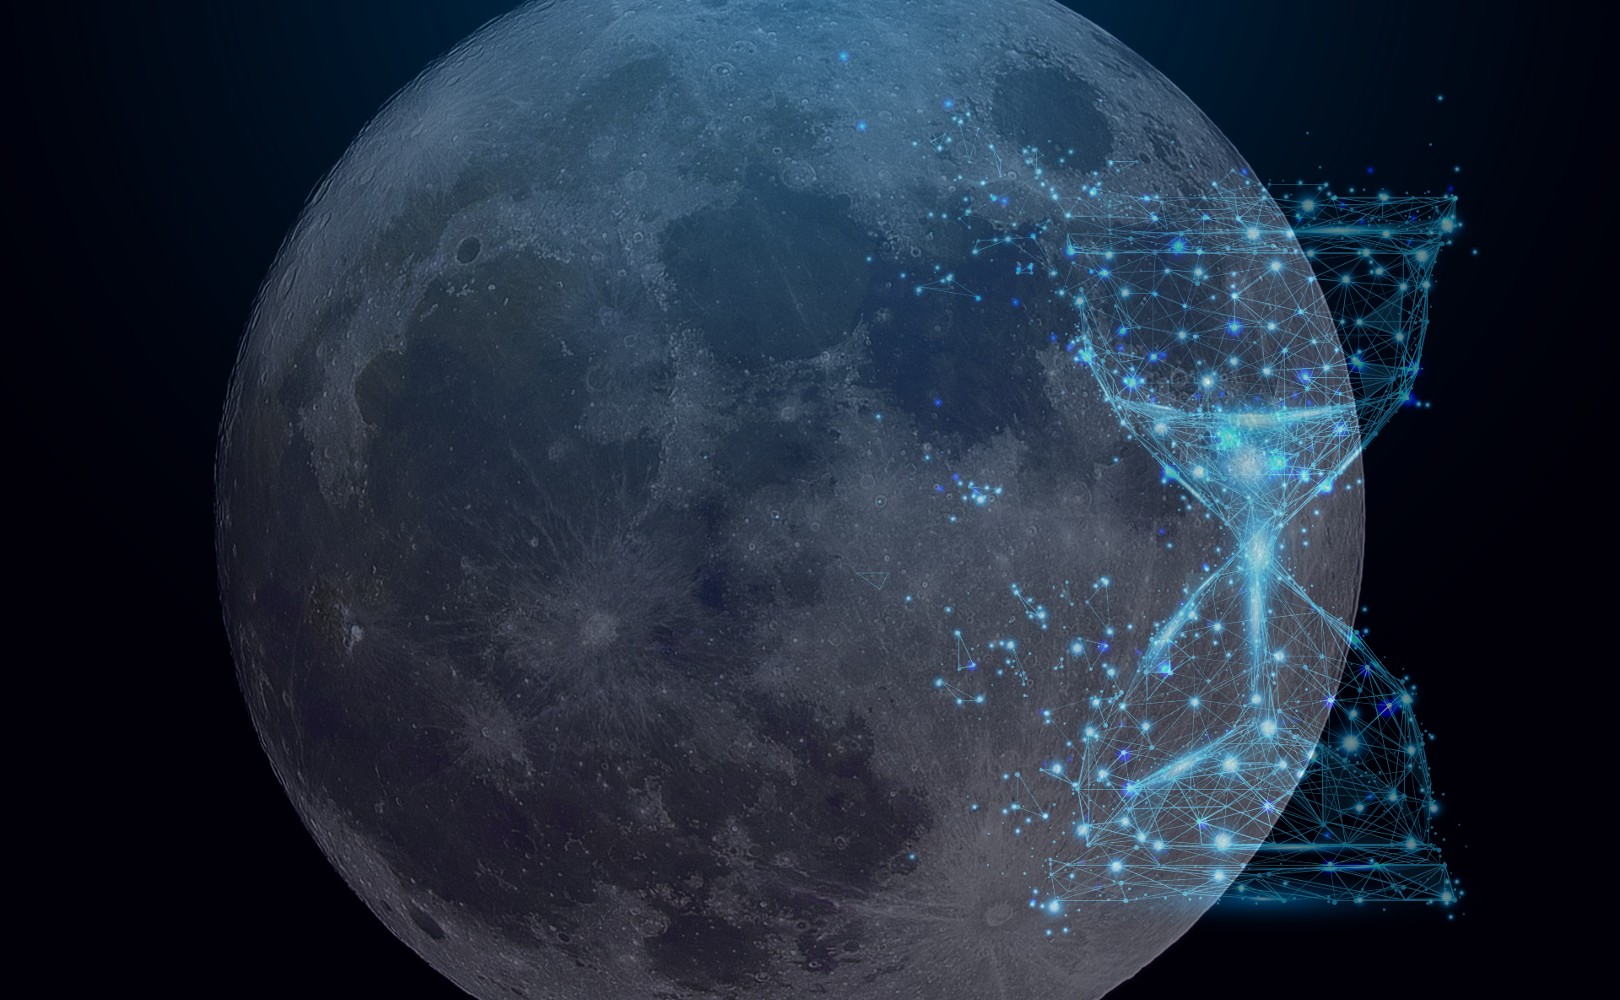 The European Space Agency wants to create a lunar time zone